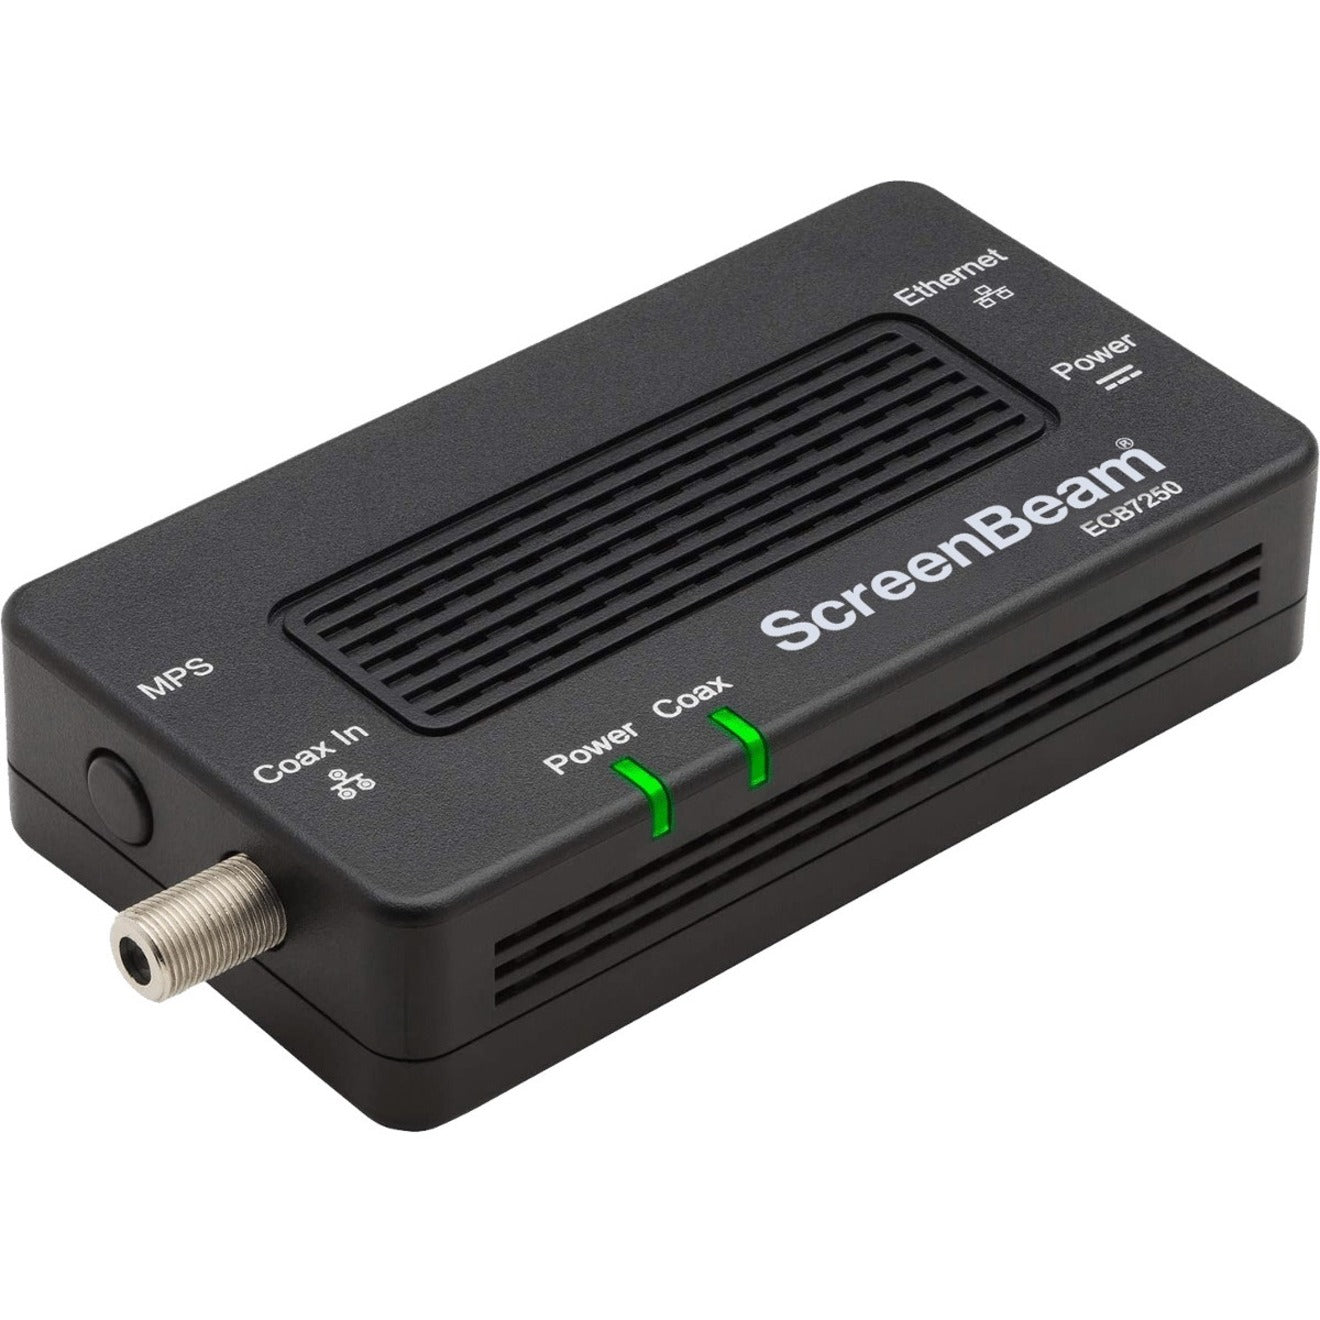 ScreenBeam ECB7250K02 MoCA 2.5 Network Adapter, High-Speed Internet Over Coaxial Cable